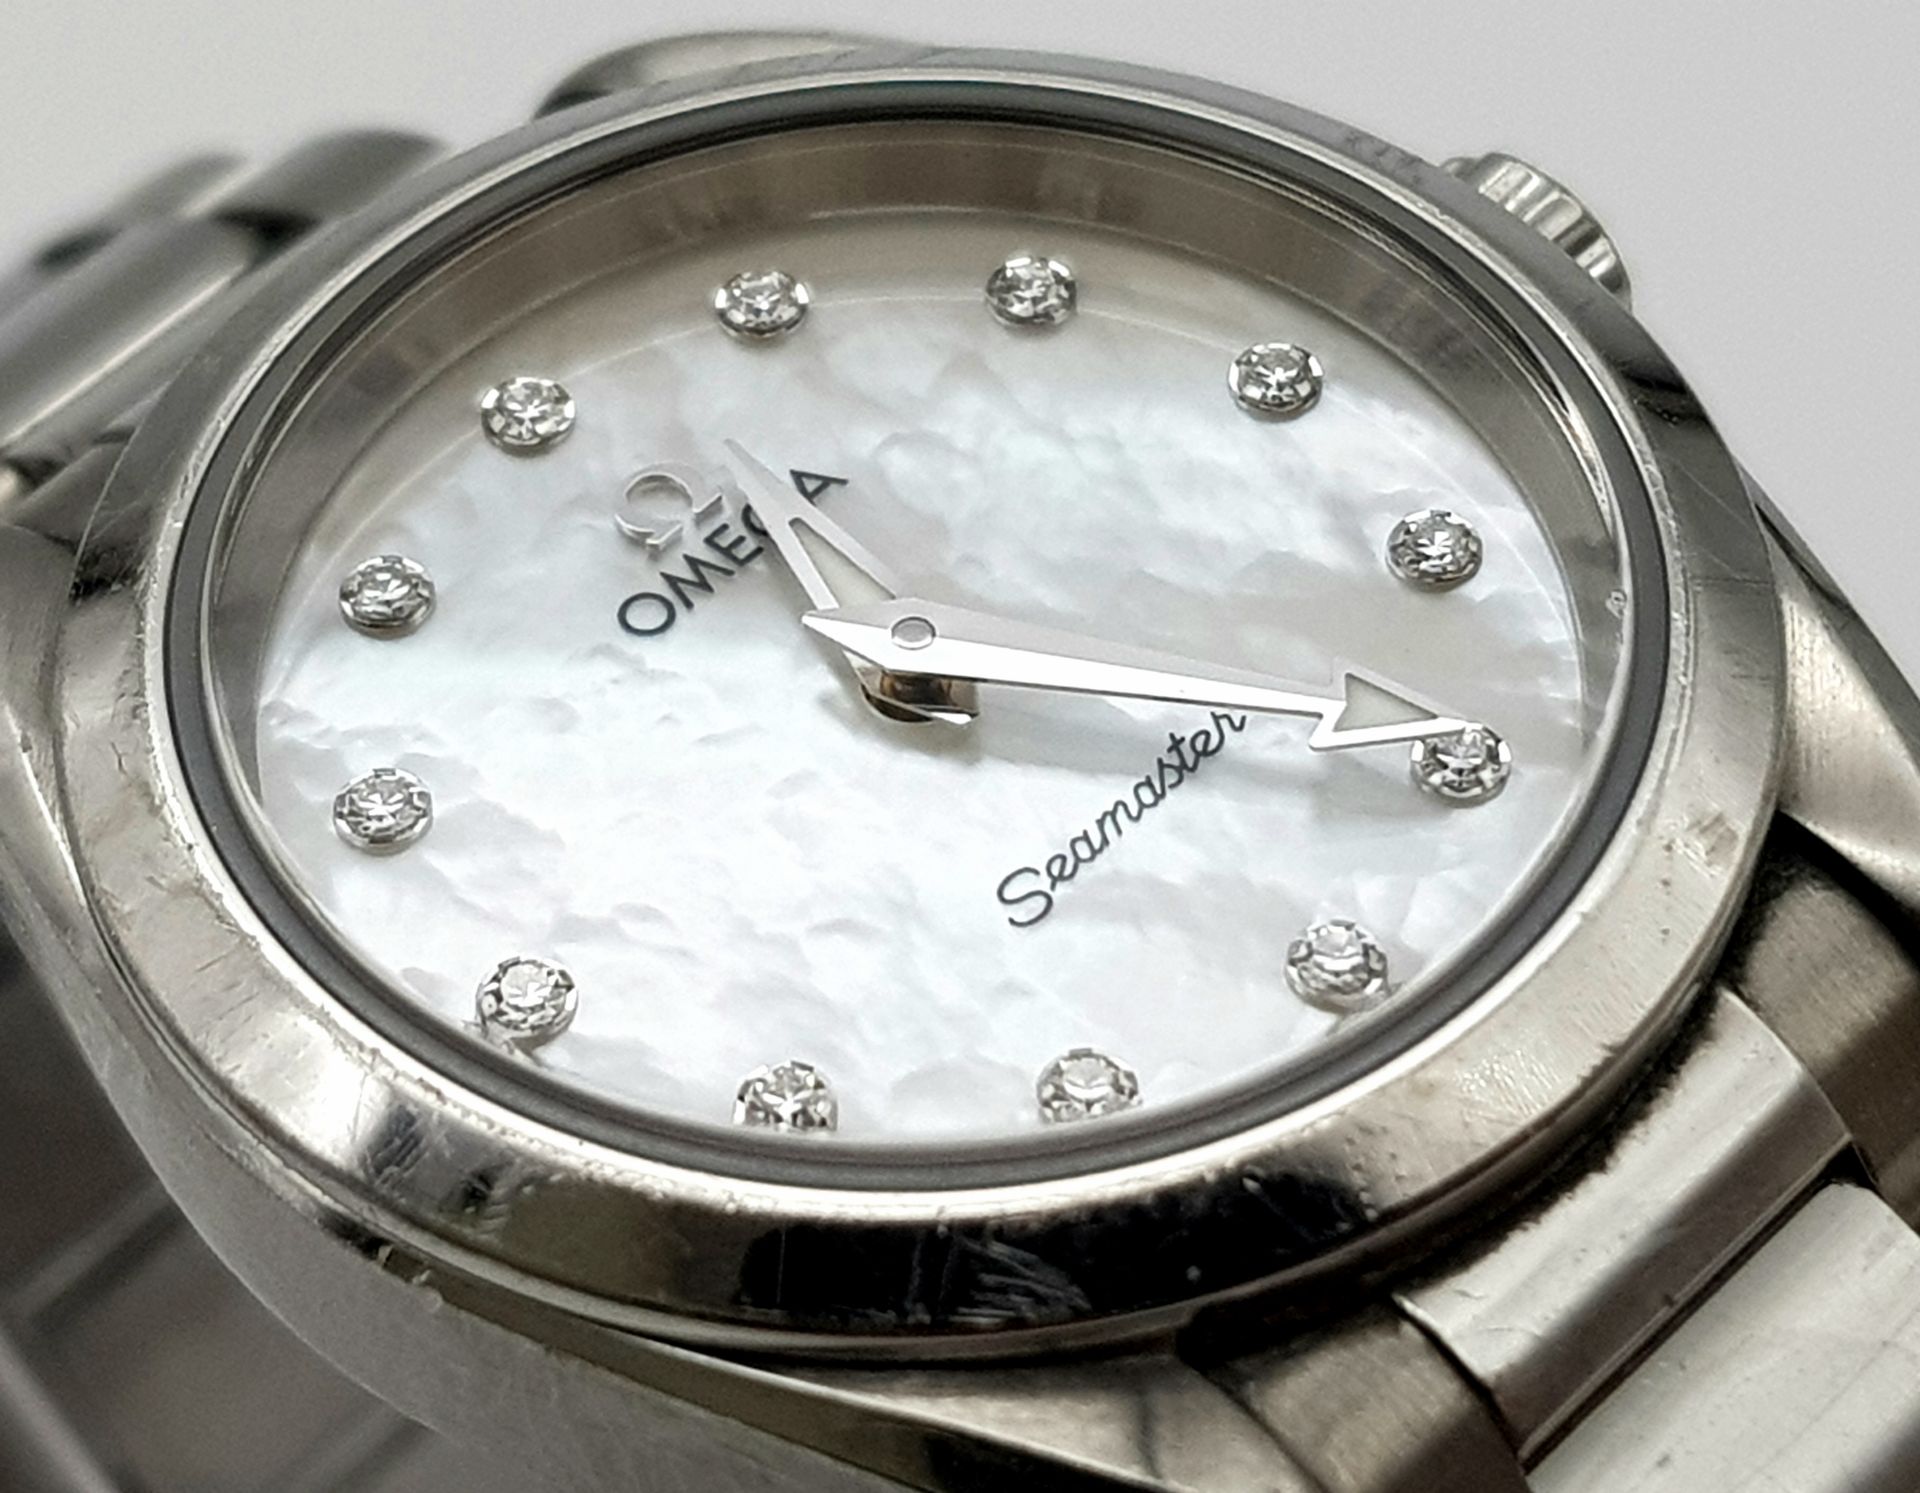 A STUNNING OMEGA "SEAMASTER" LADIES WATCH IN STAINLESS STEEL WITH MOTHER OF PEARL DIAL AND DIAMOND - Image 5 of 8